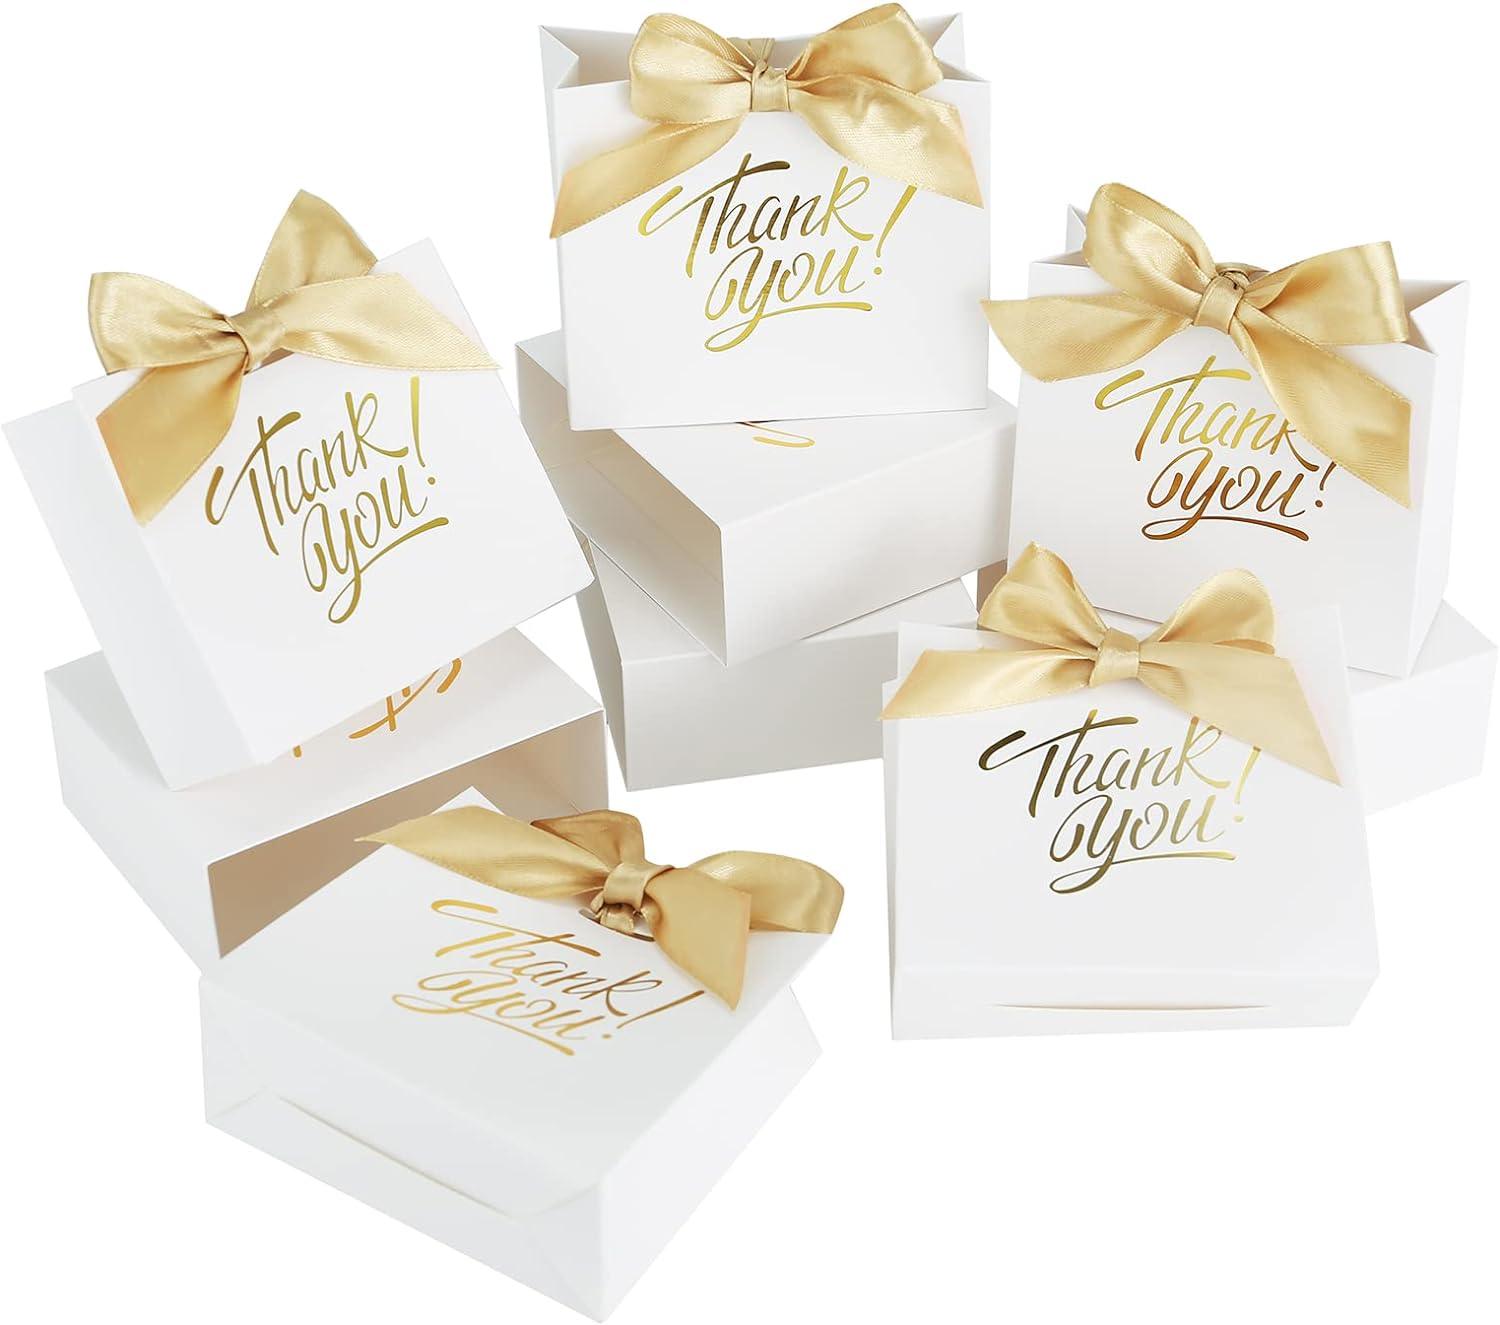 Small Gift Bags, 50 Pack Small Thank You Bags 4.5x1.8x3.9 Inches Party Favor Bags White Paper Gift Bags Candy Bags with Bow Ribbon - Lasercutwraps Shop